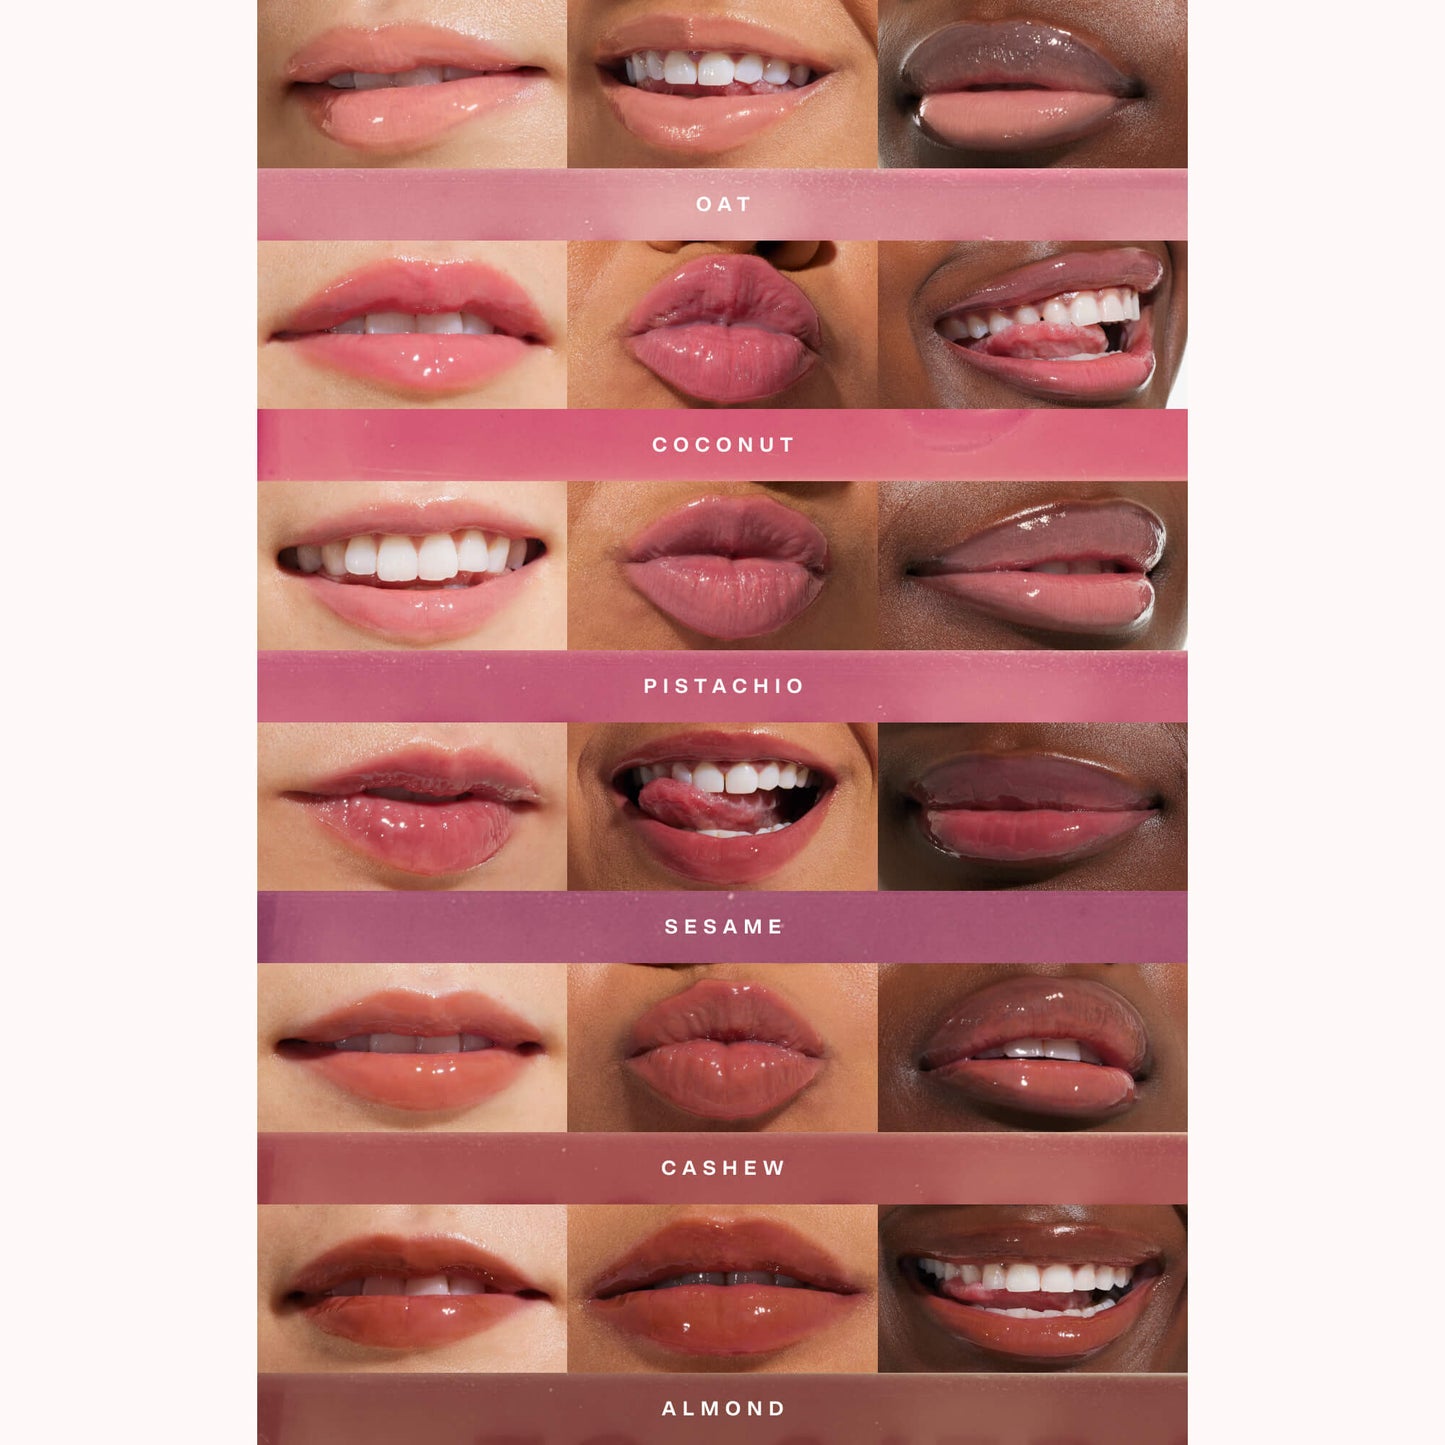 [Shared: All shades of the Tower 28 Beauty ShineOn Milky Lip Jelly applied on three different skin tones]